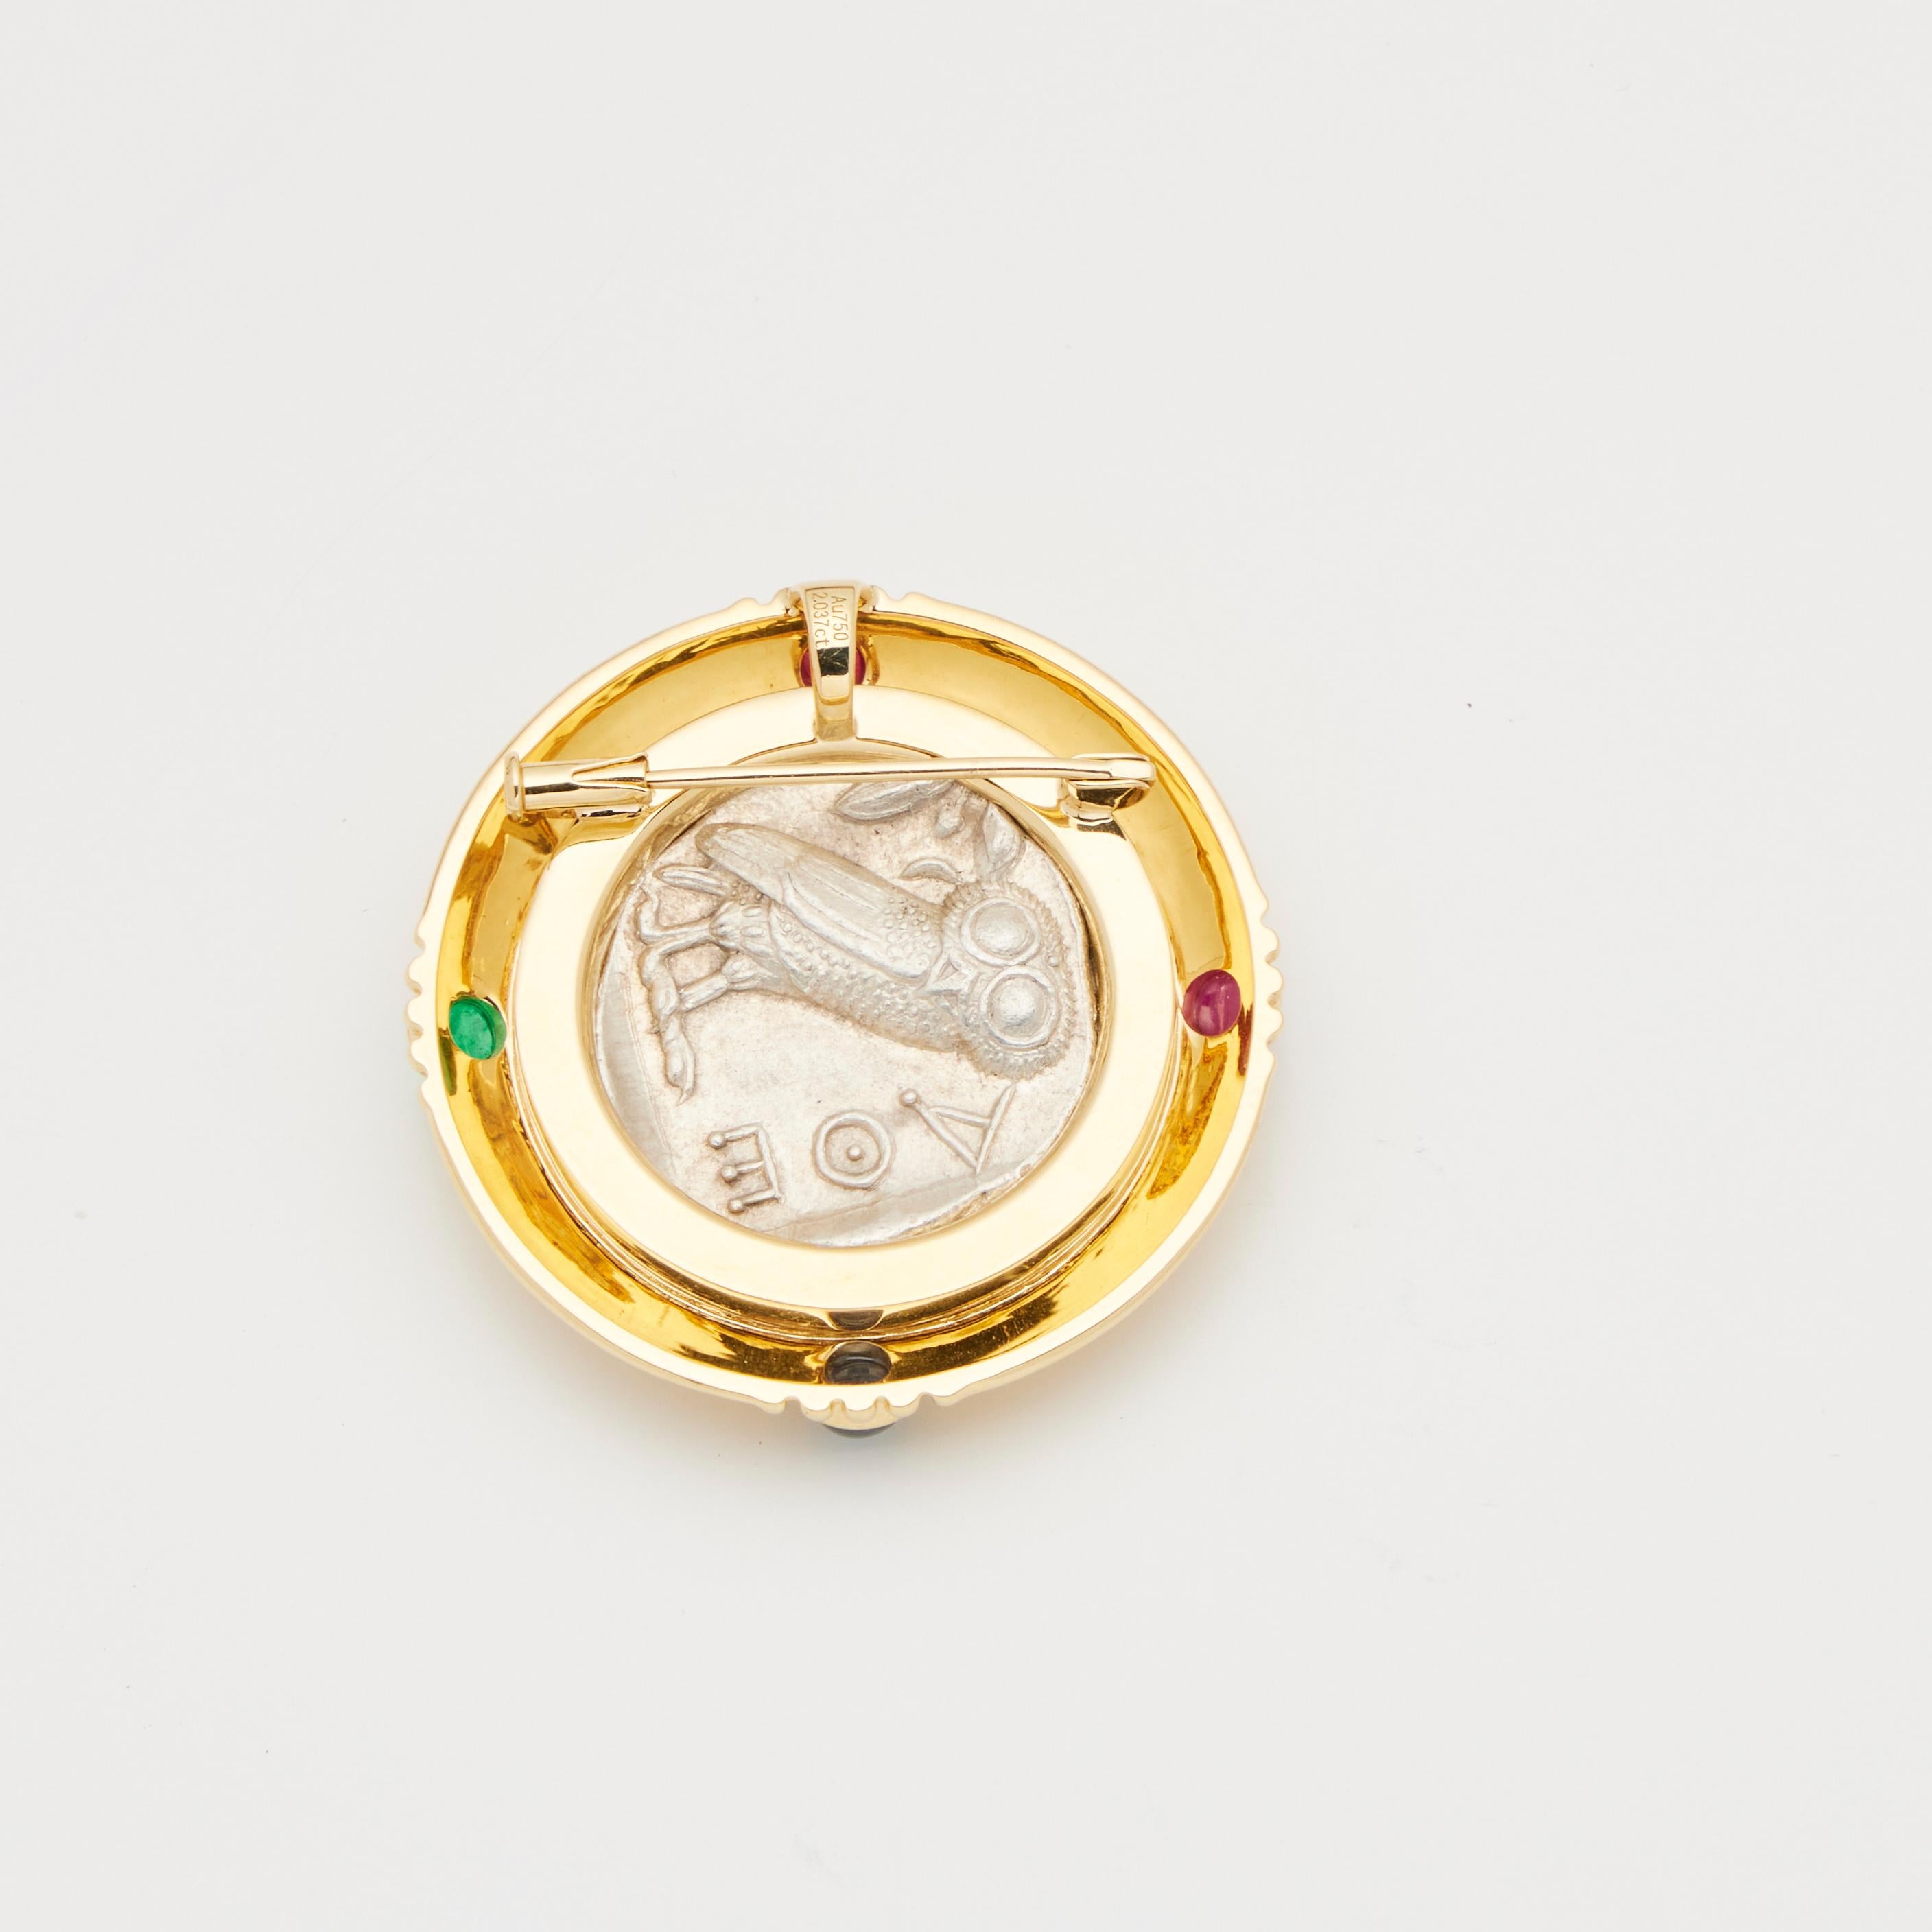 18-karat yellow gold
Ancient, authentic Greek silver coin center inset
Decorate with multi-gemstone 1.947 ct
Can be used as pendant
Total weight is about 34.33g
1.5 *1.5 inches